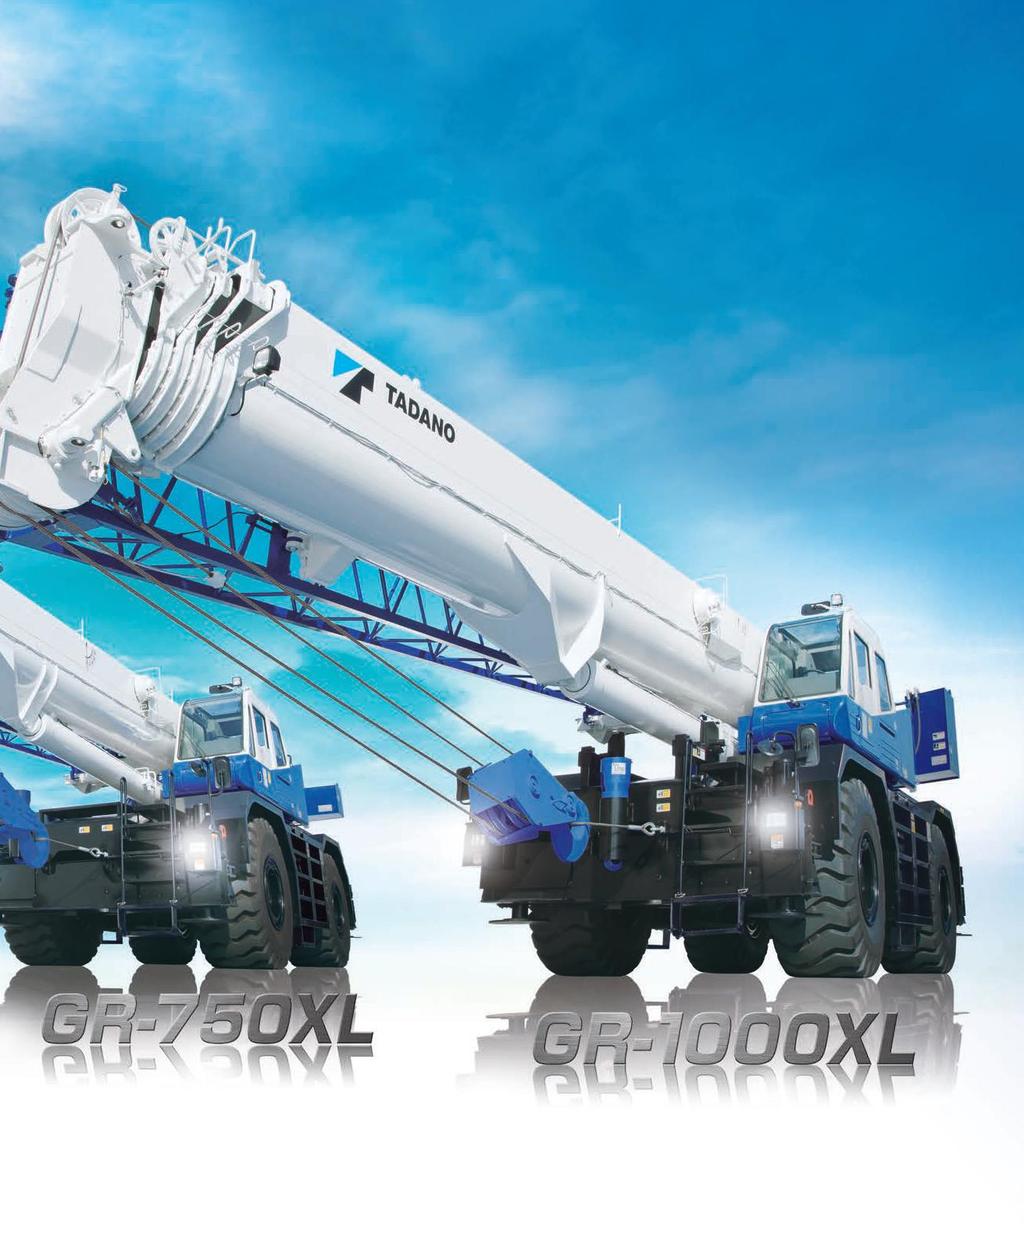 CONTENTS NEW FEATURES HELLO-NET System The Environmentally Friendly Features Fuel Monitoring System Eco Mode System Positive Control System Crane The Ultimate boom for rough terrain crane Assist